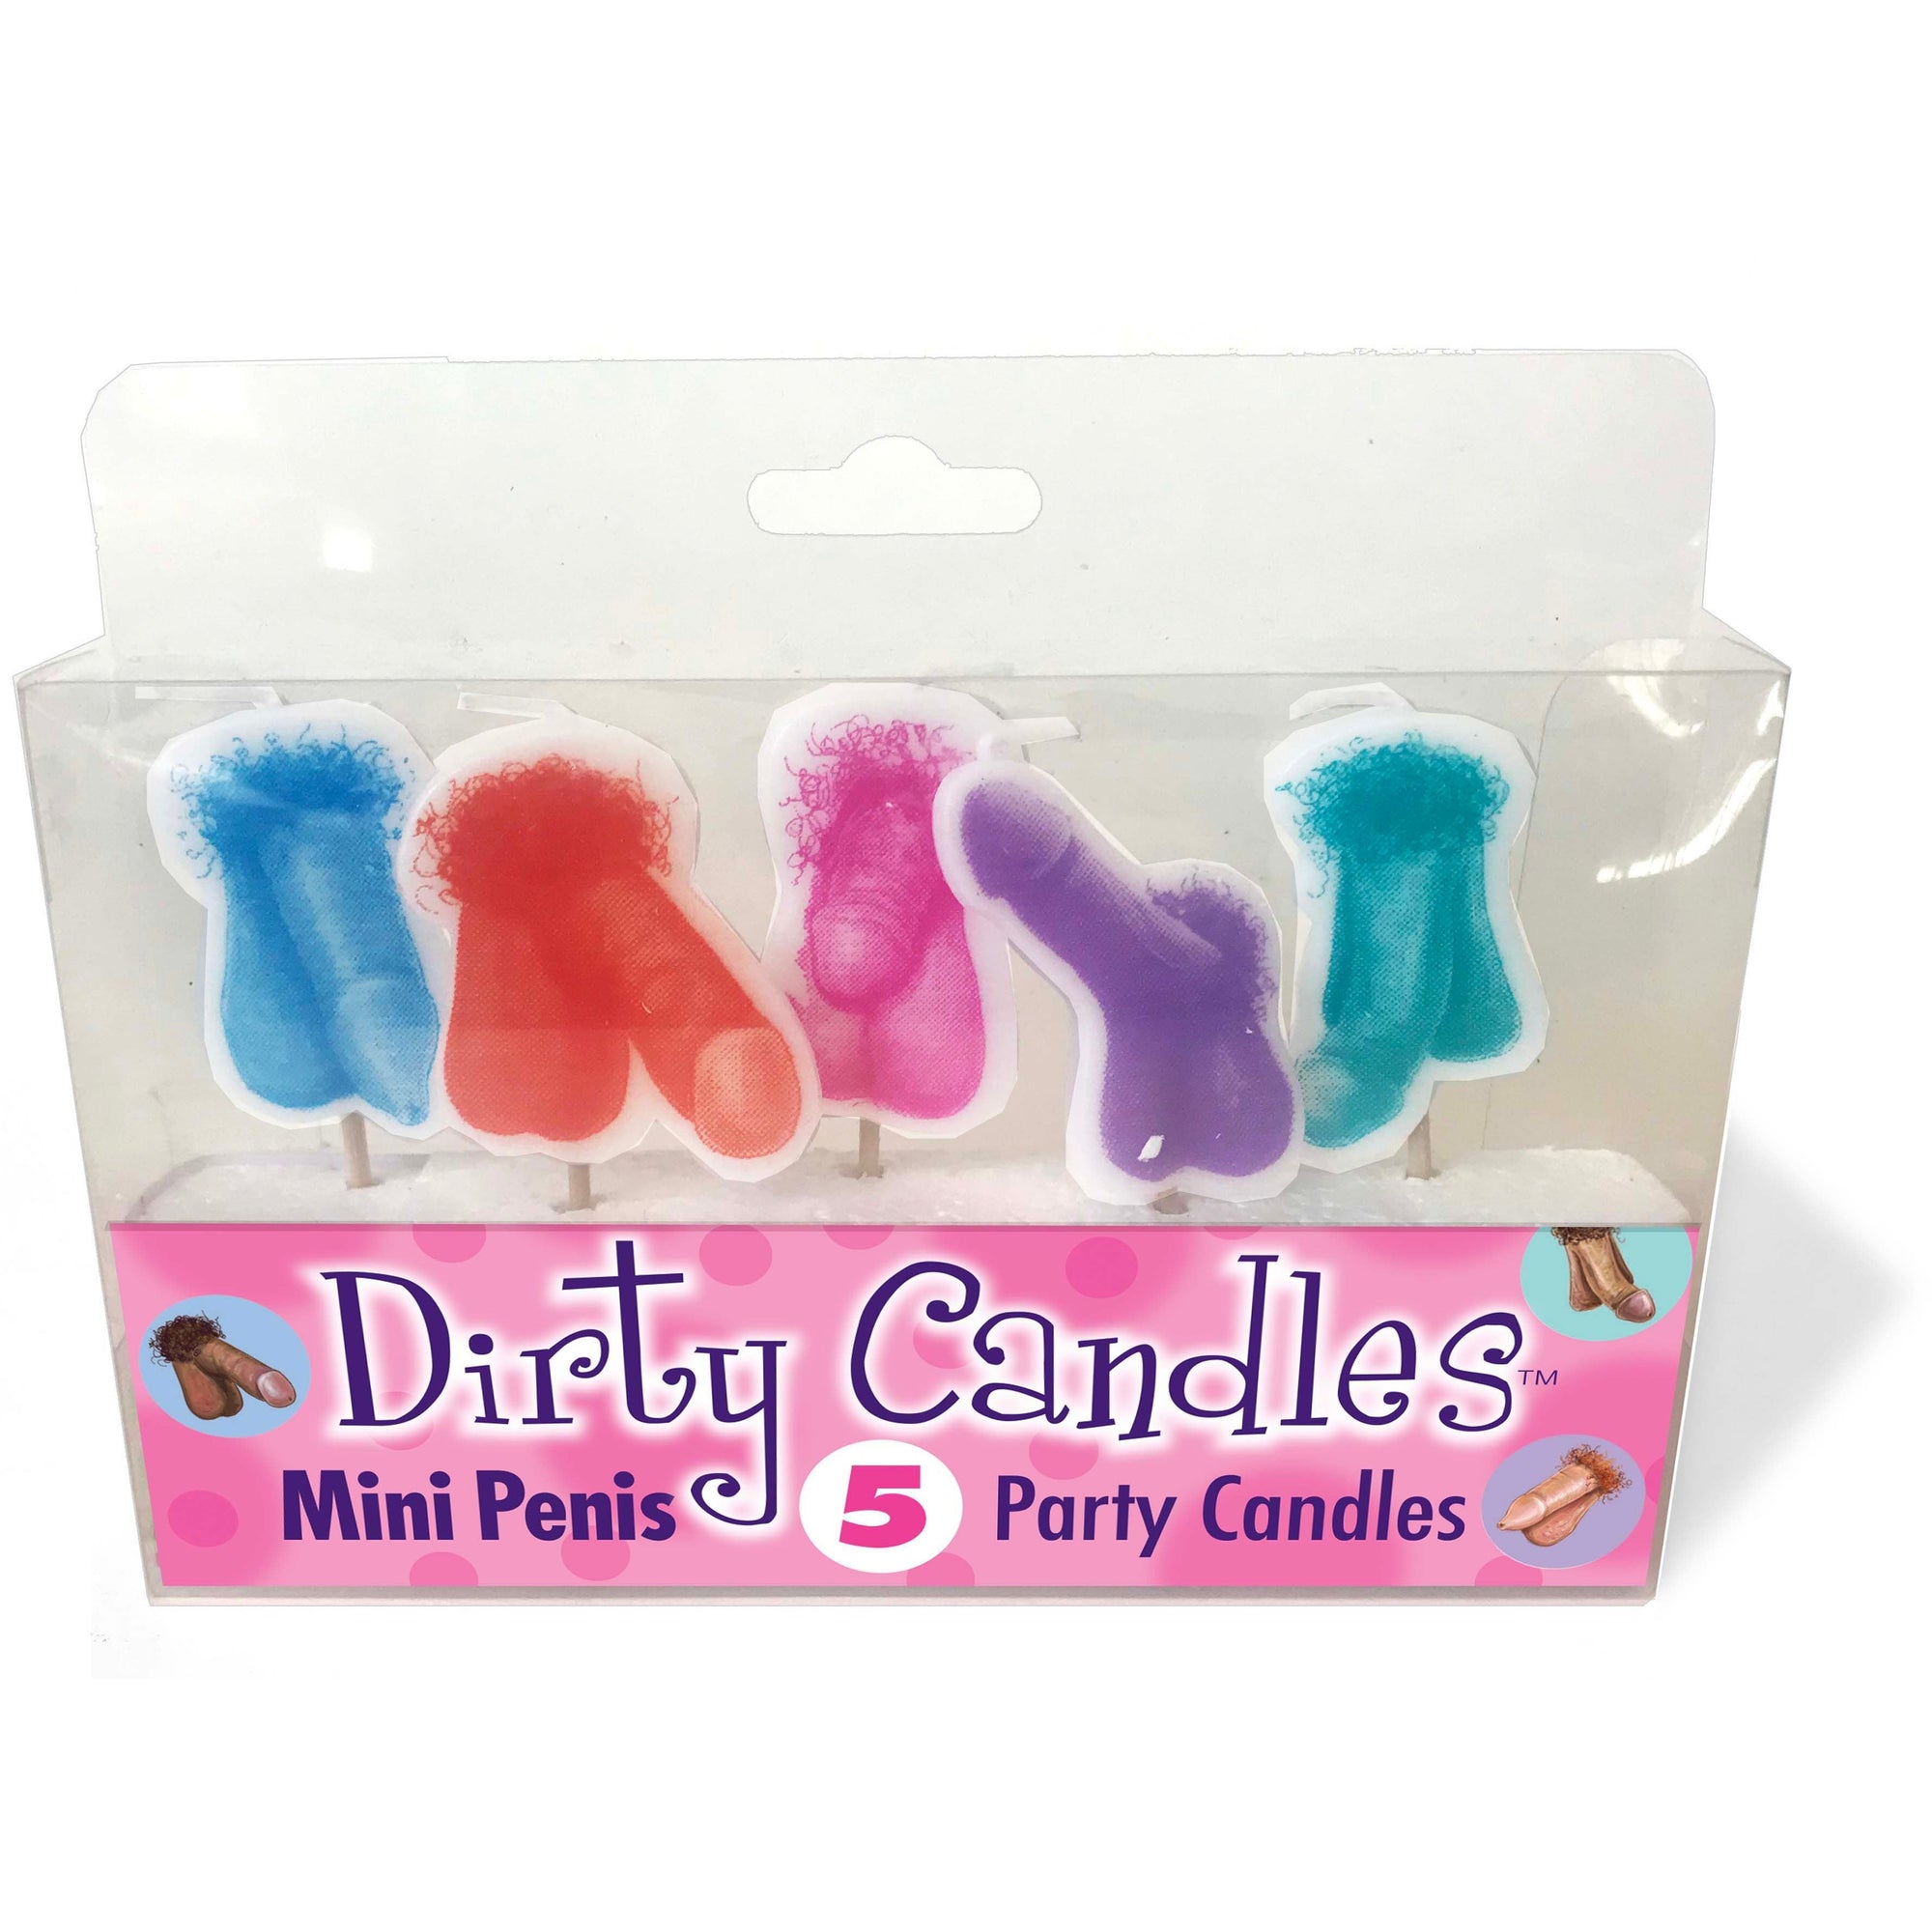 Dirty Candles Mini Penis by Little Geenie